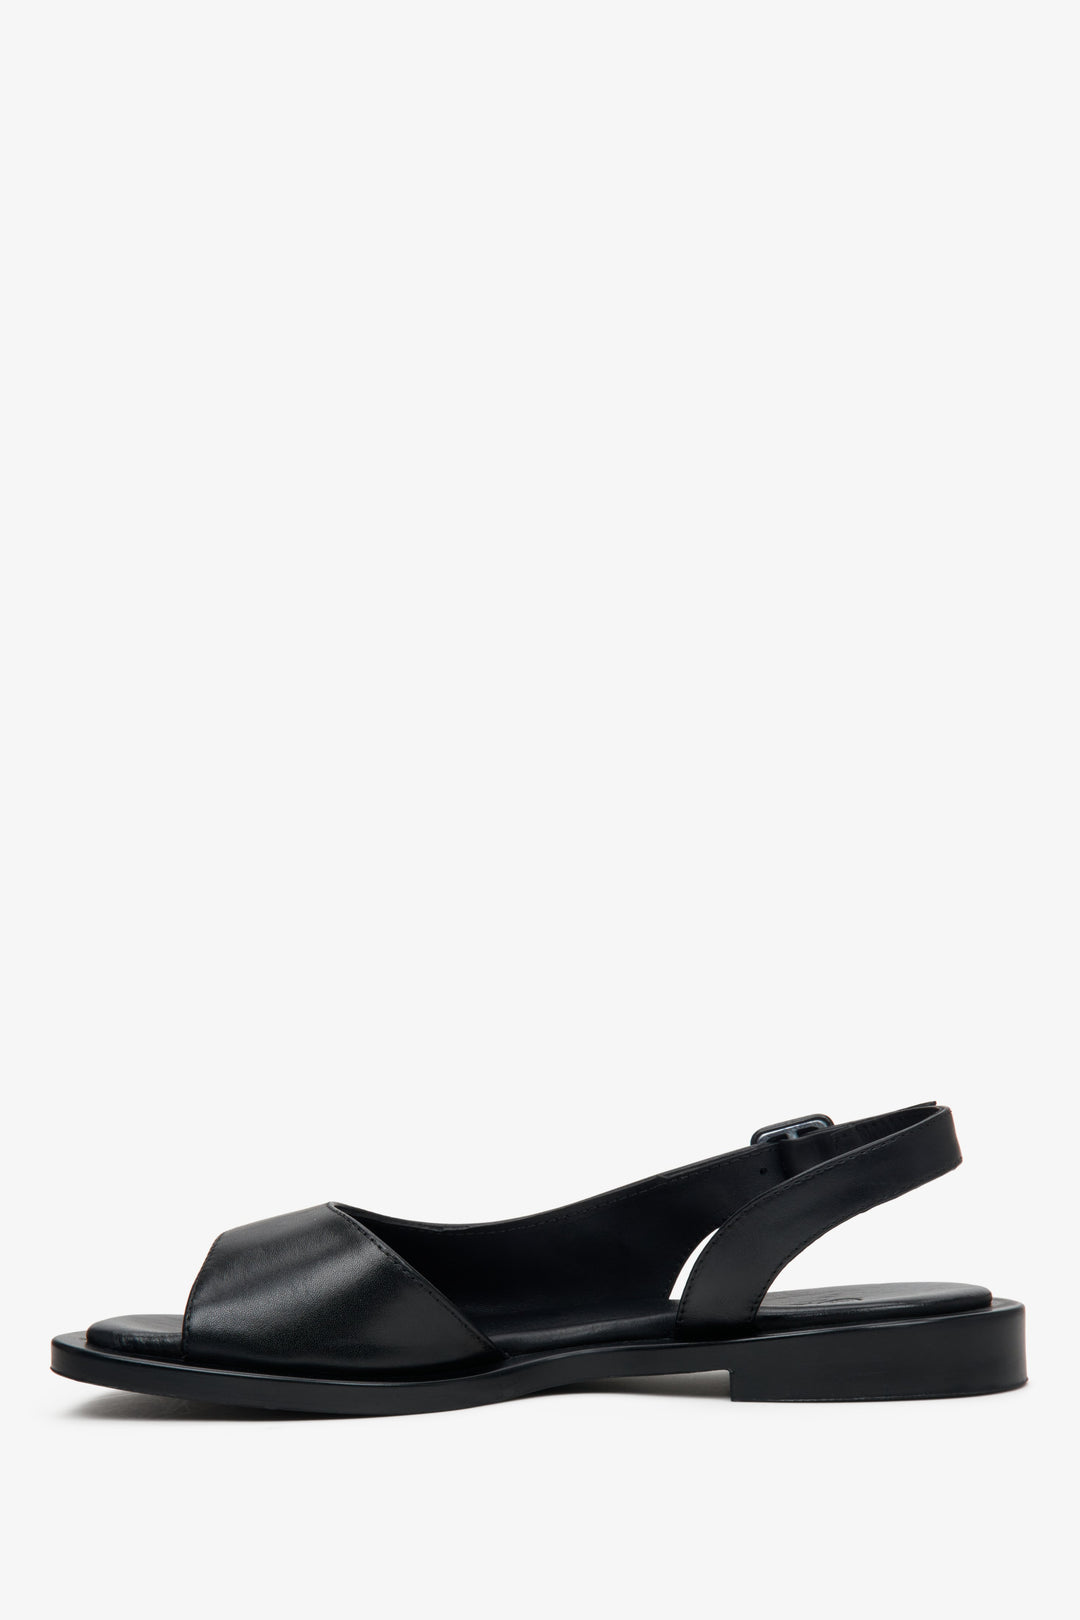 Women's black open-toe sandals by Estro made of natural leather.